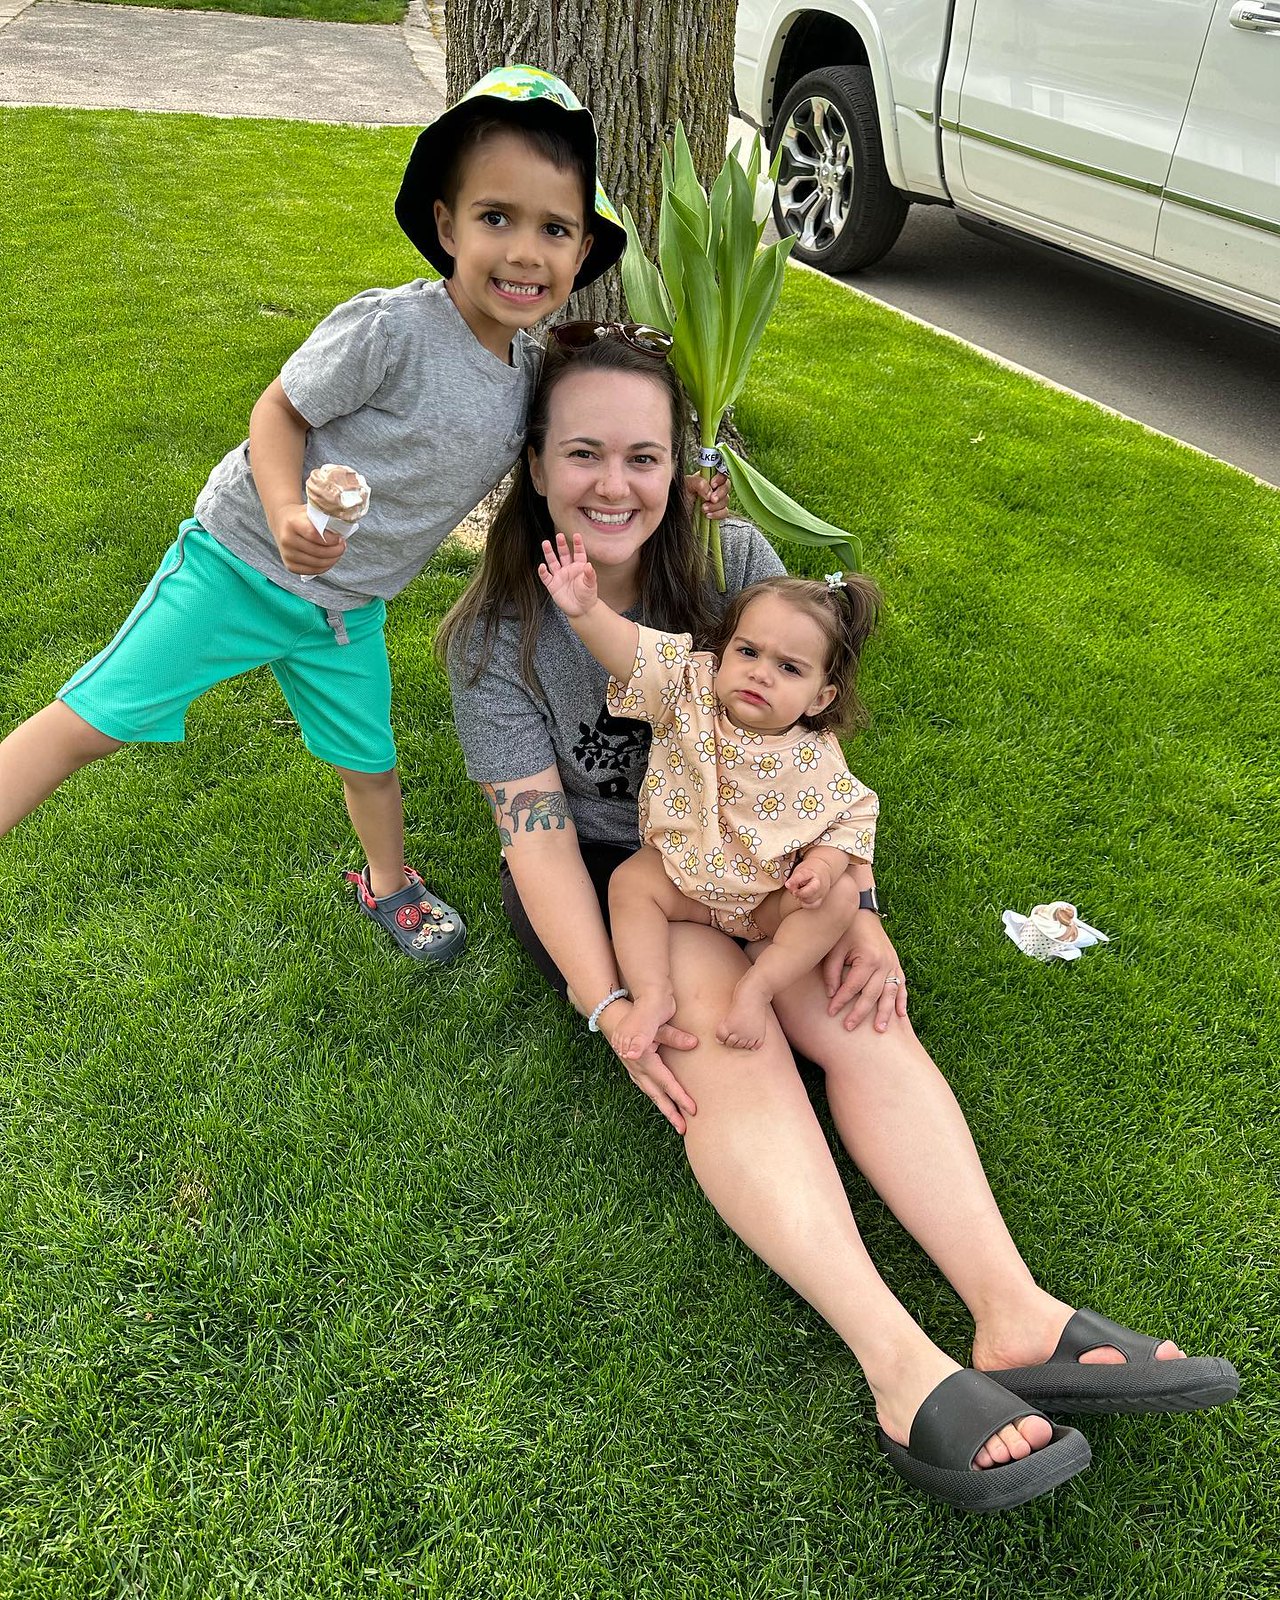 Lauren Ufford with kids enjoying good weather on mothers day.